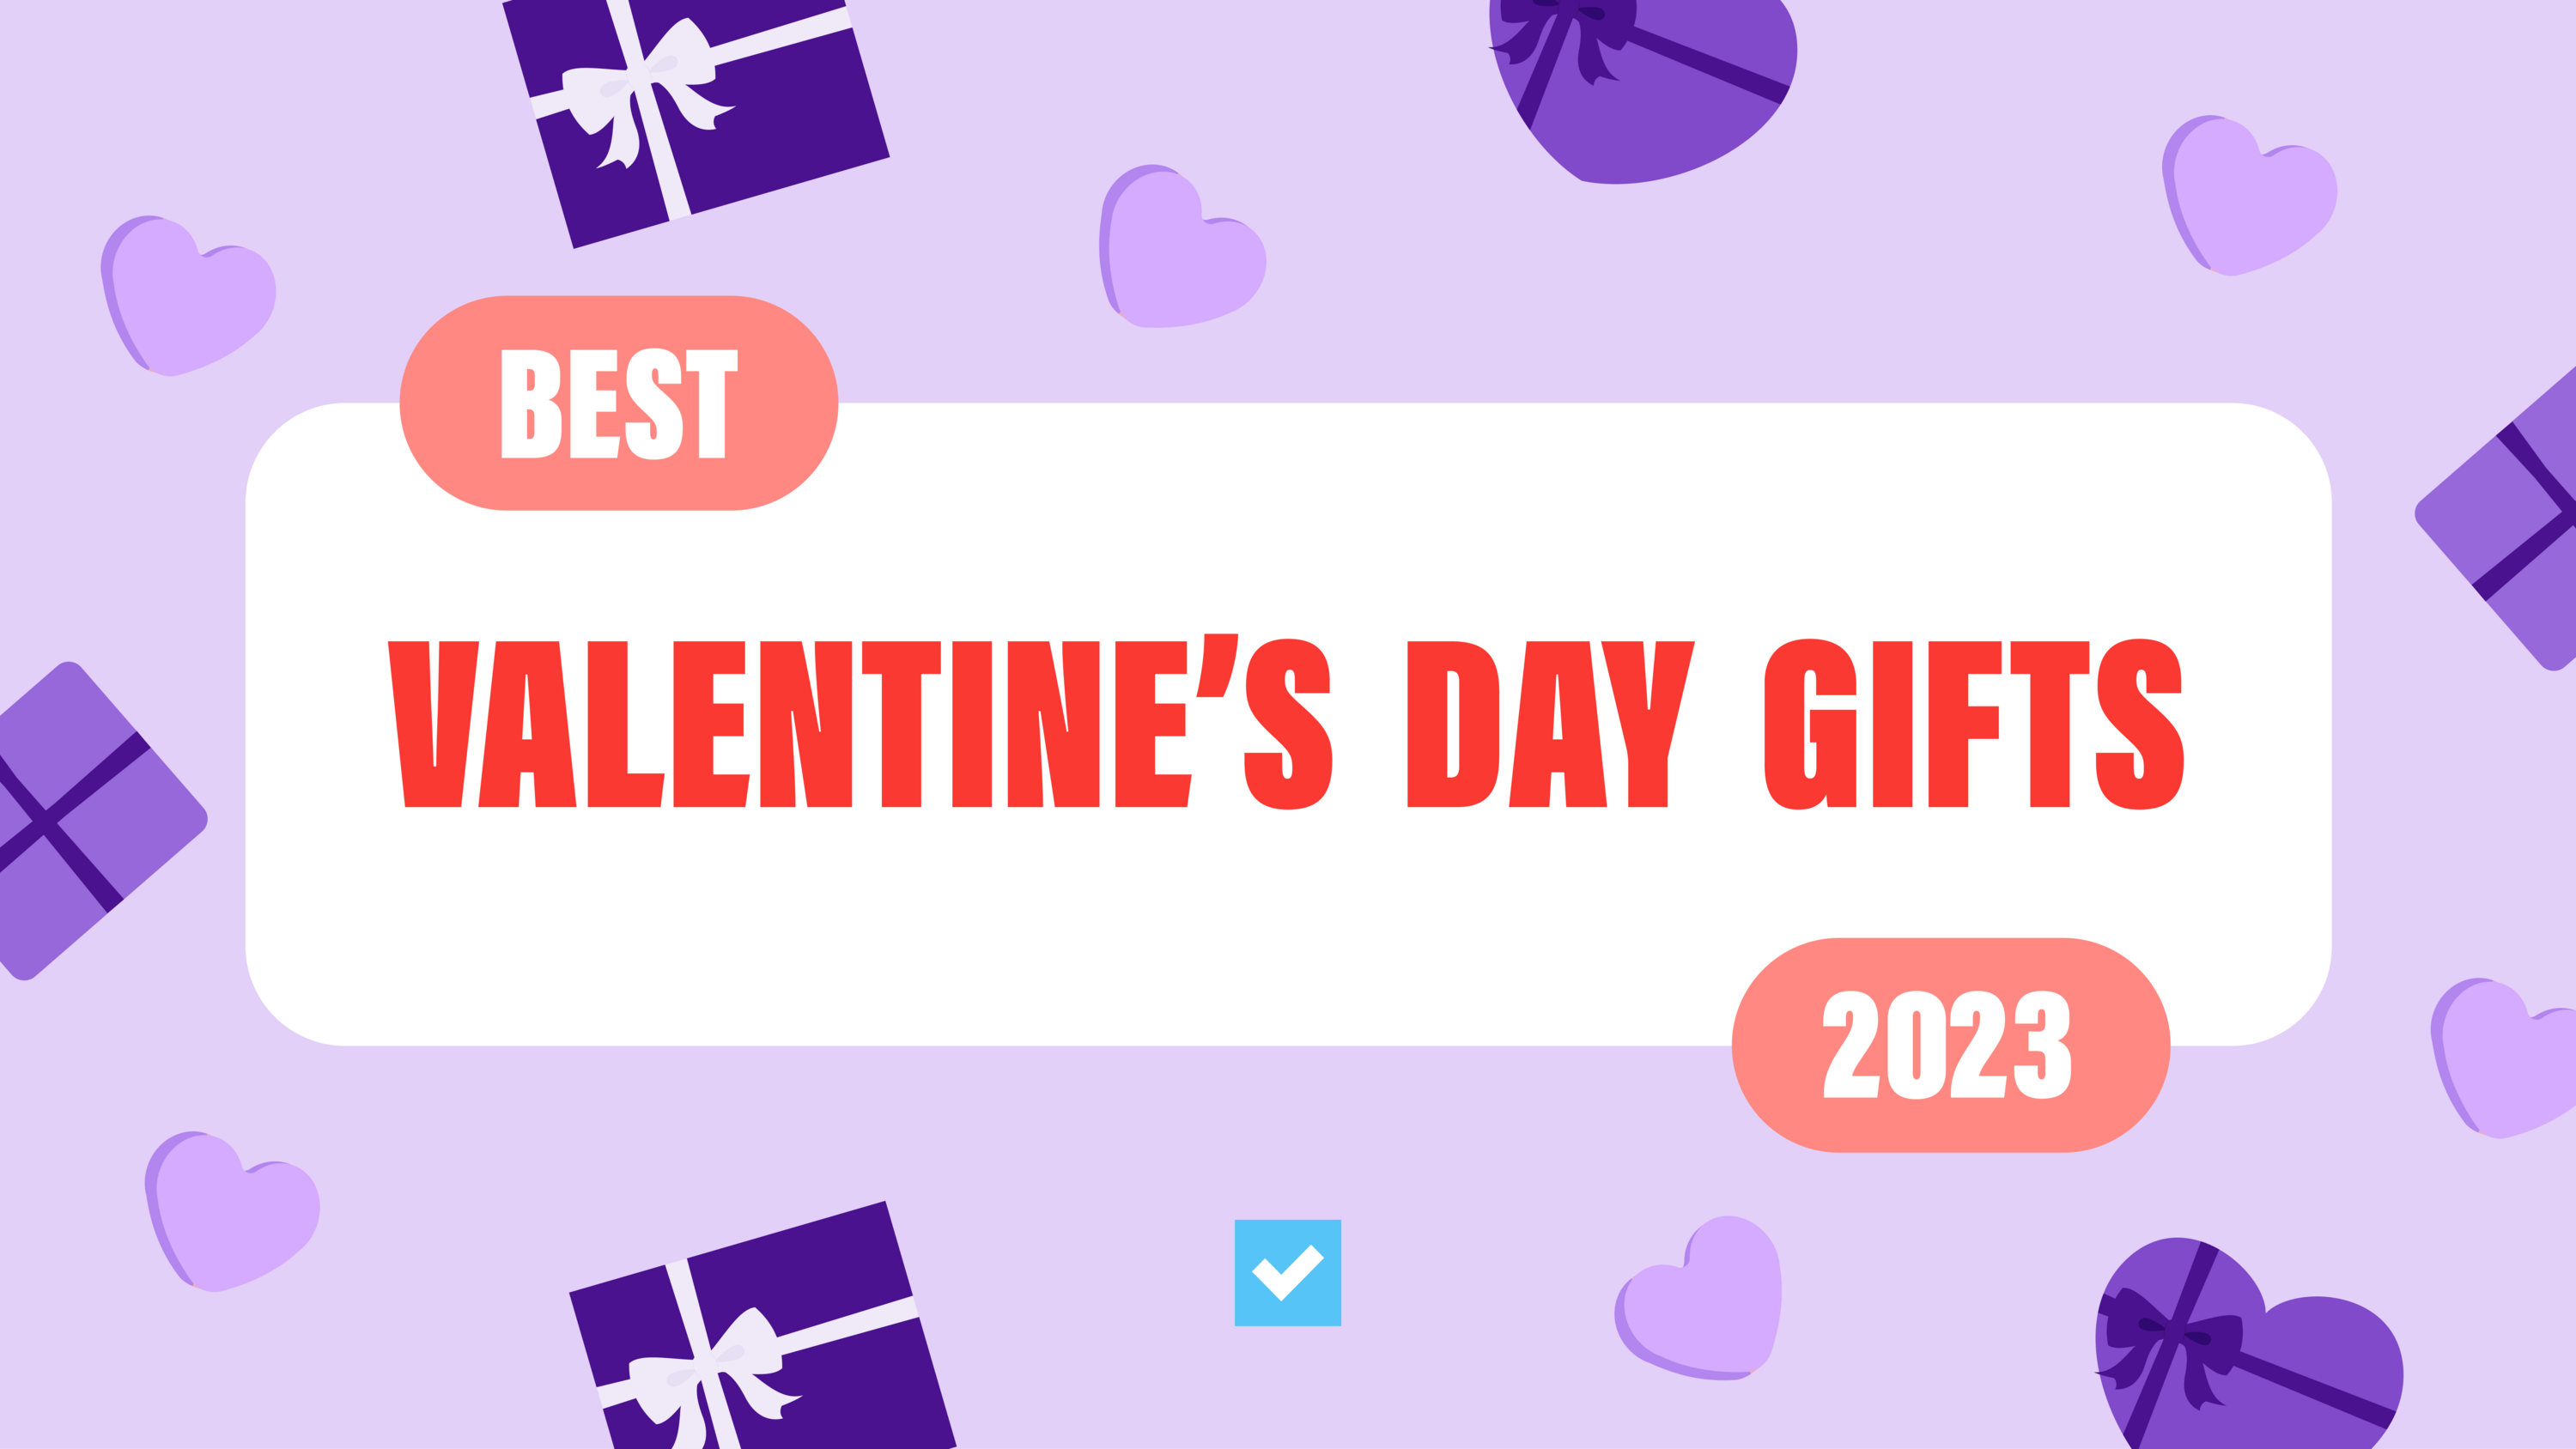 Valentine's Day 2023 gift guide: The best Valentine's Day gifts for all of your loved ones